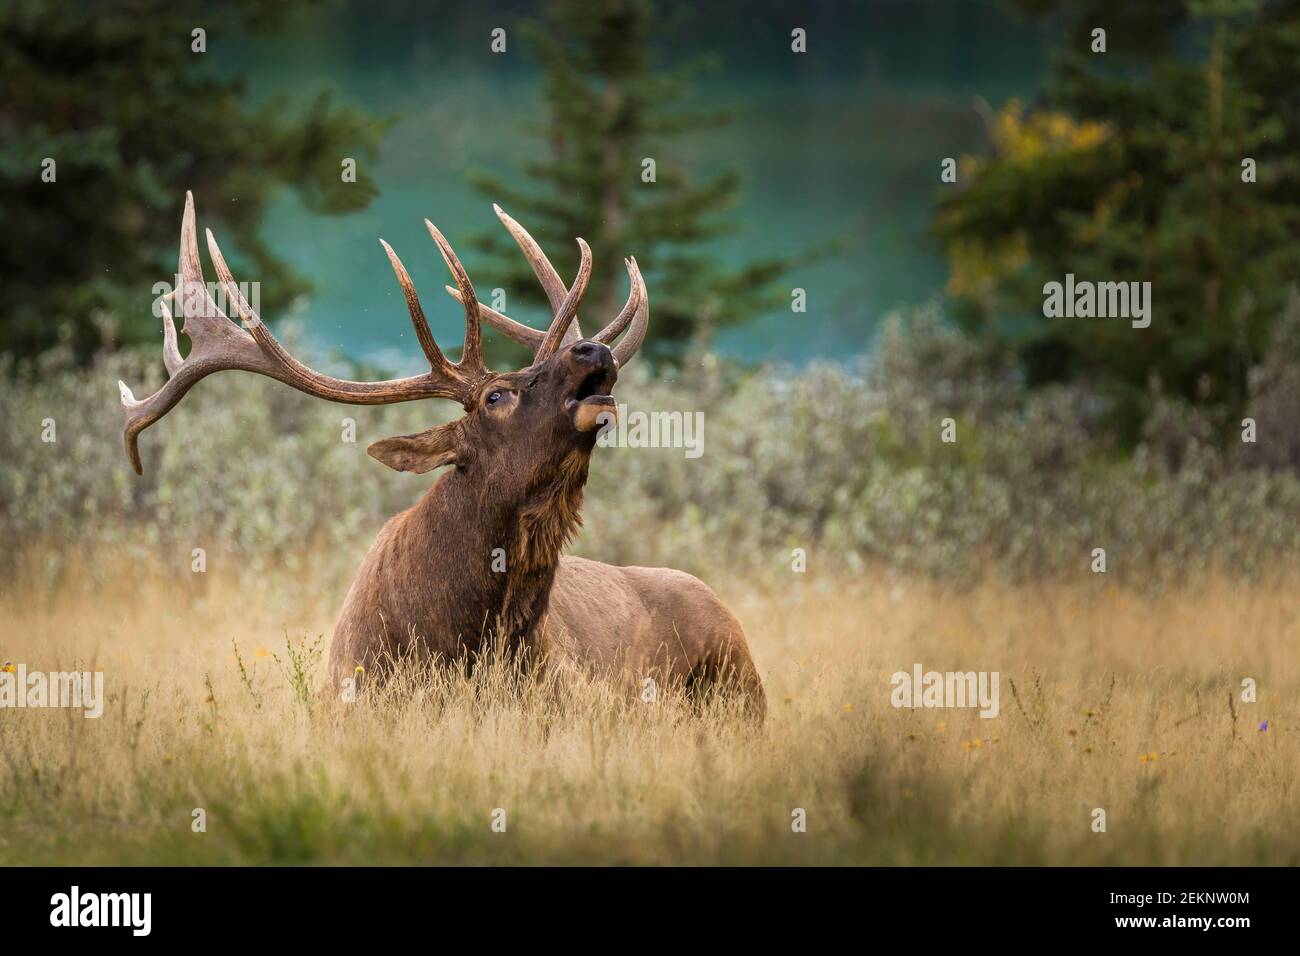 Bull Elk (Cervus canadensis) (Wapiti) with big antlers, laying and resting on the grass while calling cow elks during the rut season in fall Stock Photo